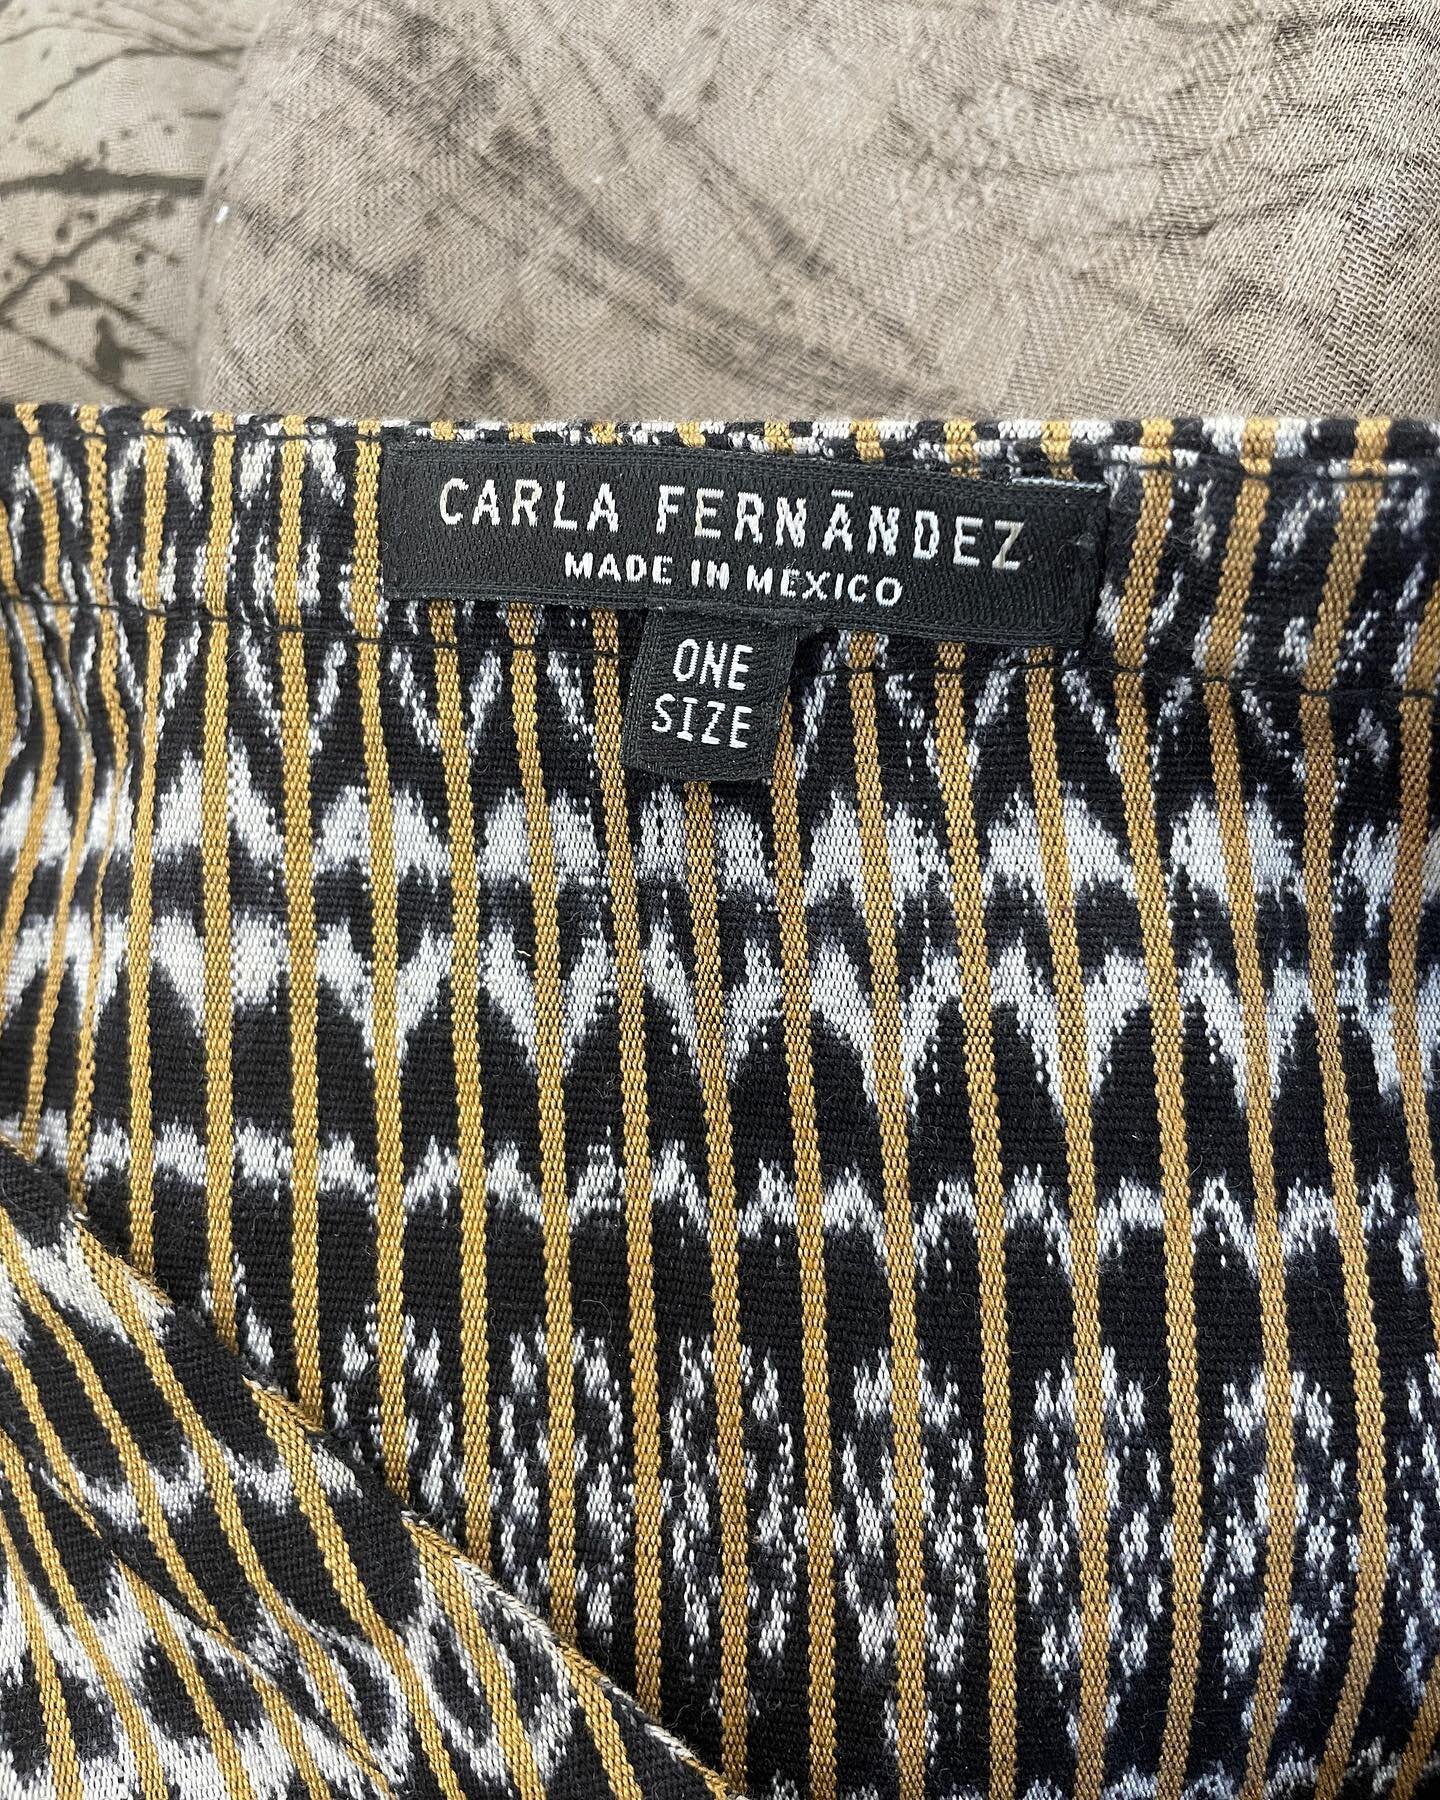 Well, I&rsquo;m very touched by the enthusiasm this project is getting! The next piece I&rsquo;m posting is a Carla Fernandez dress made from ikat rebozos. Very reasonable prices and this one is a one size fits most. Again, DM me for details. As you 